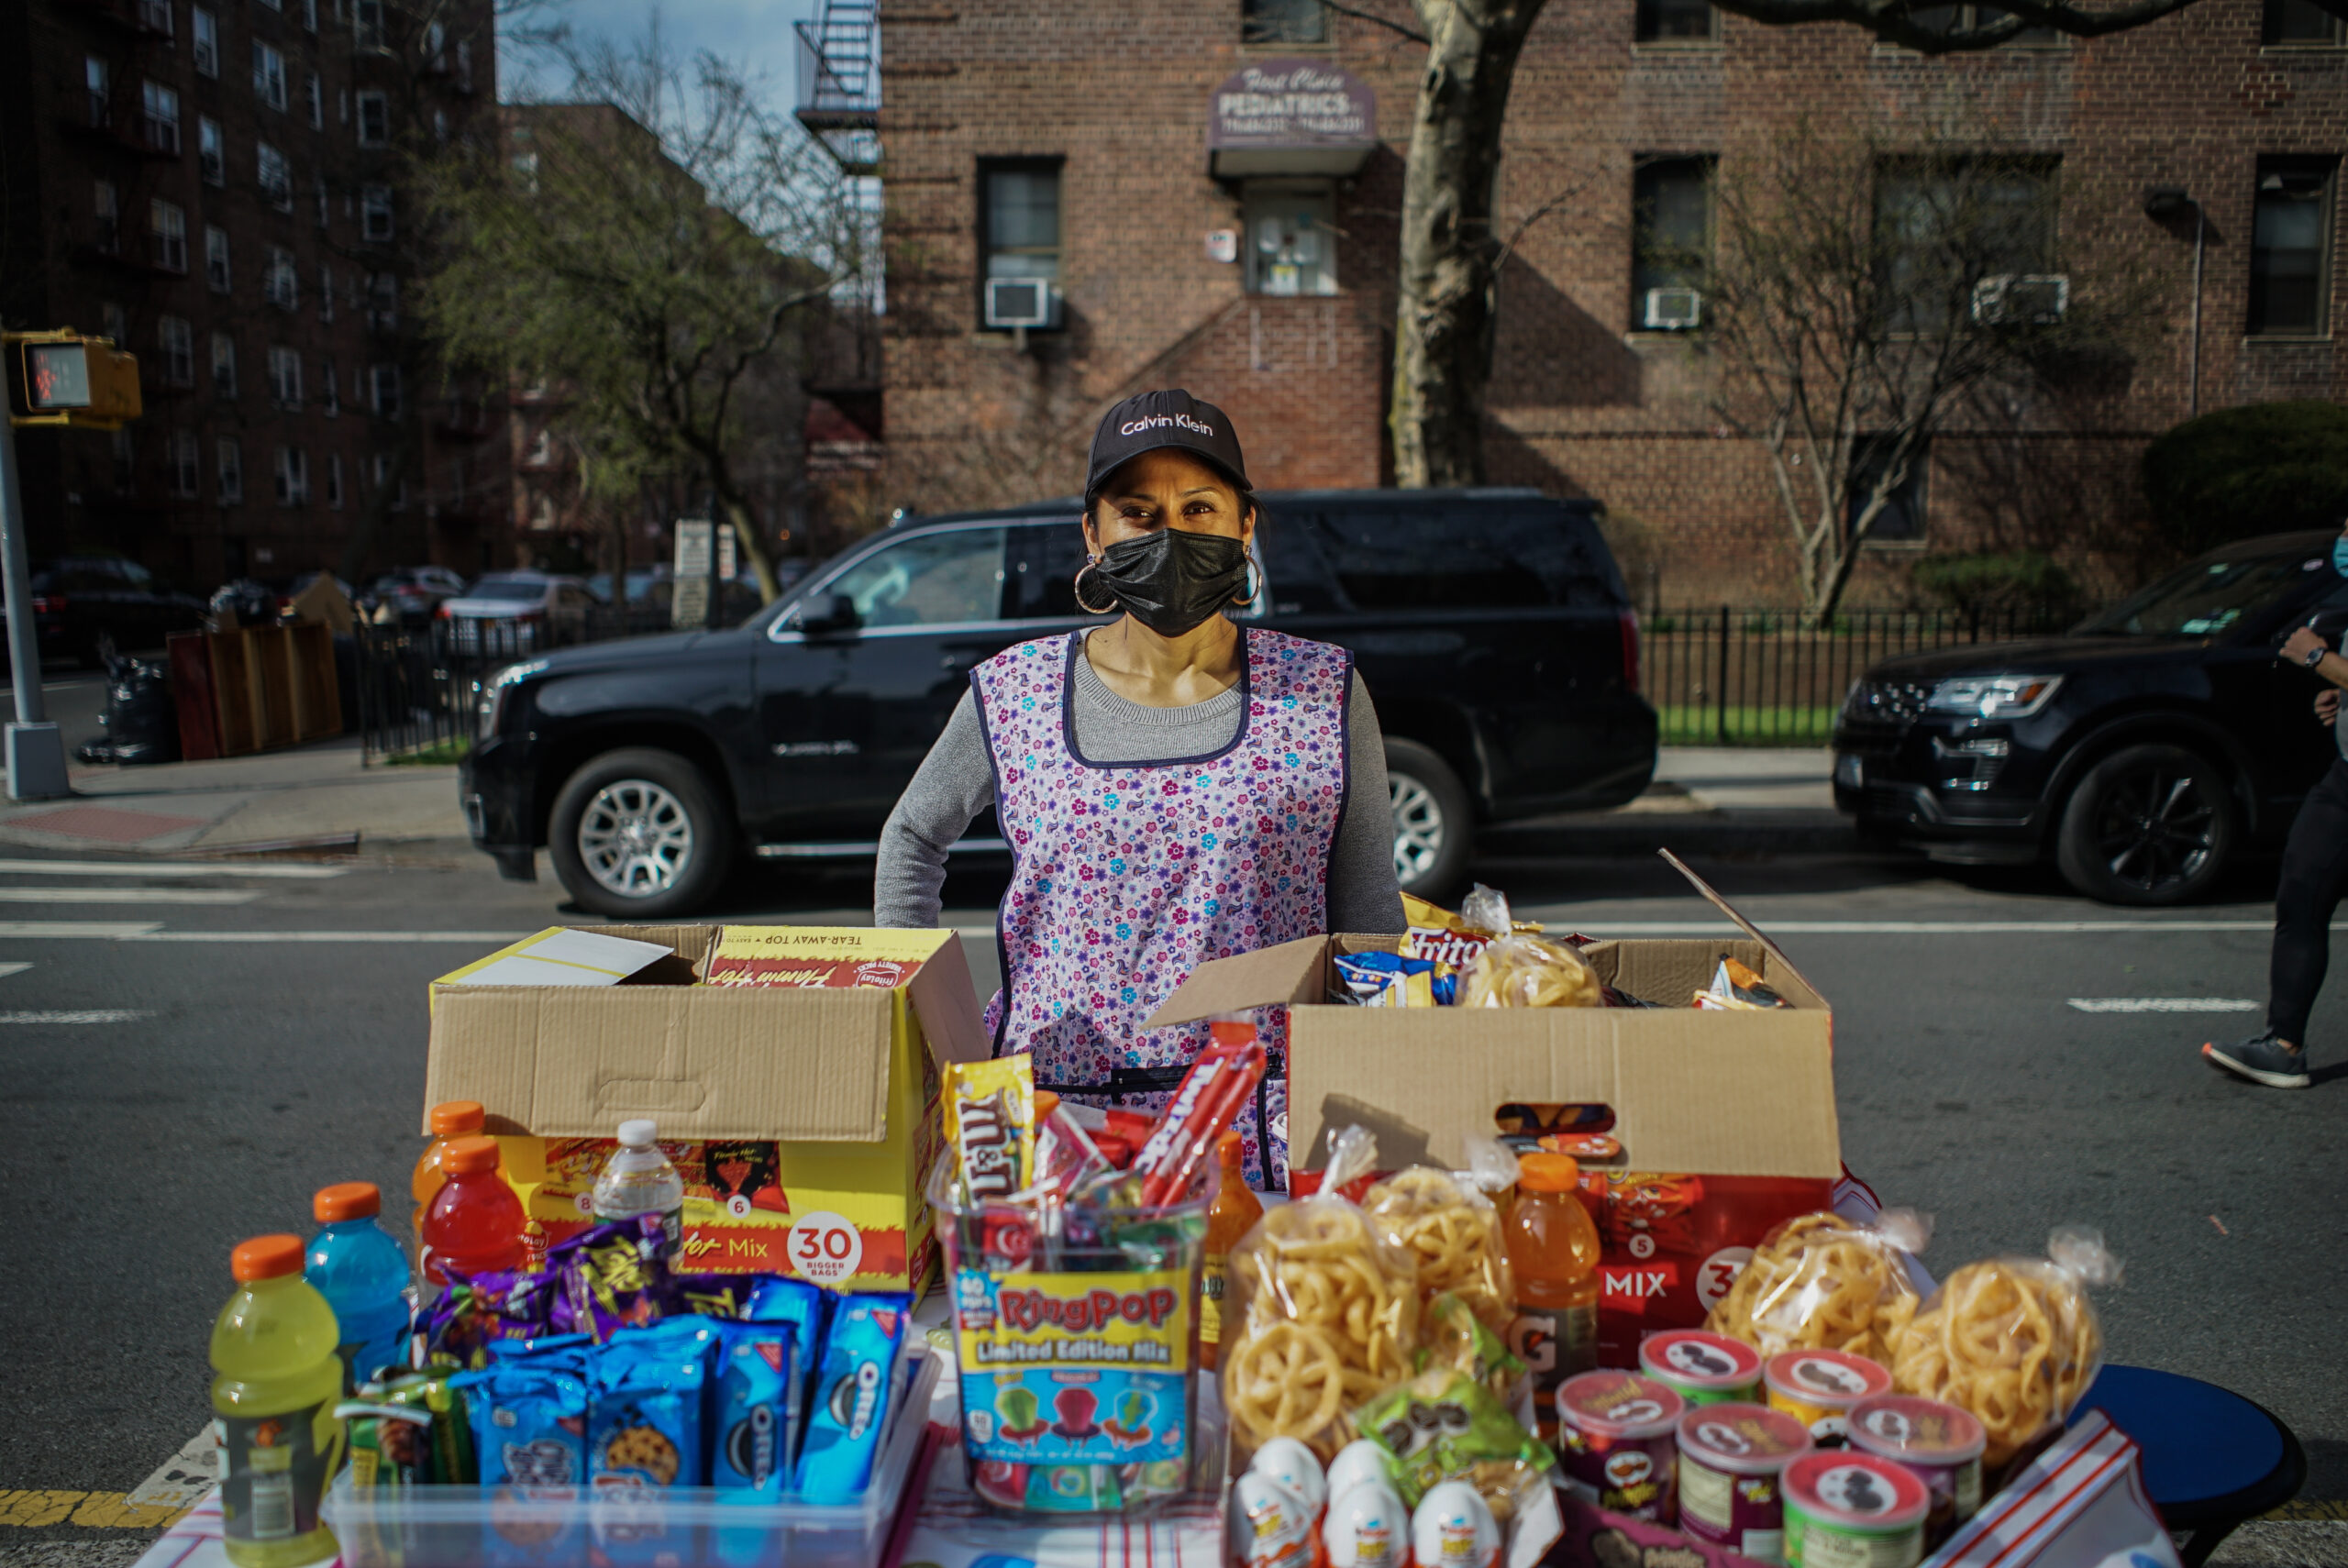 Janet Bravo stands behind her food table, wearing a mask and apron. She is selling drinks, snacks and candy.